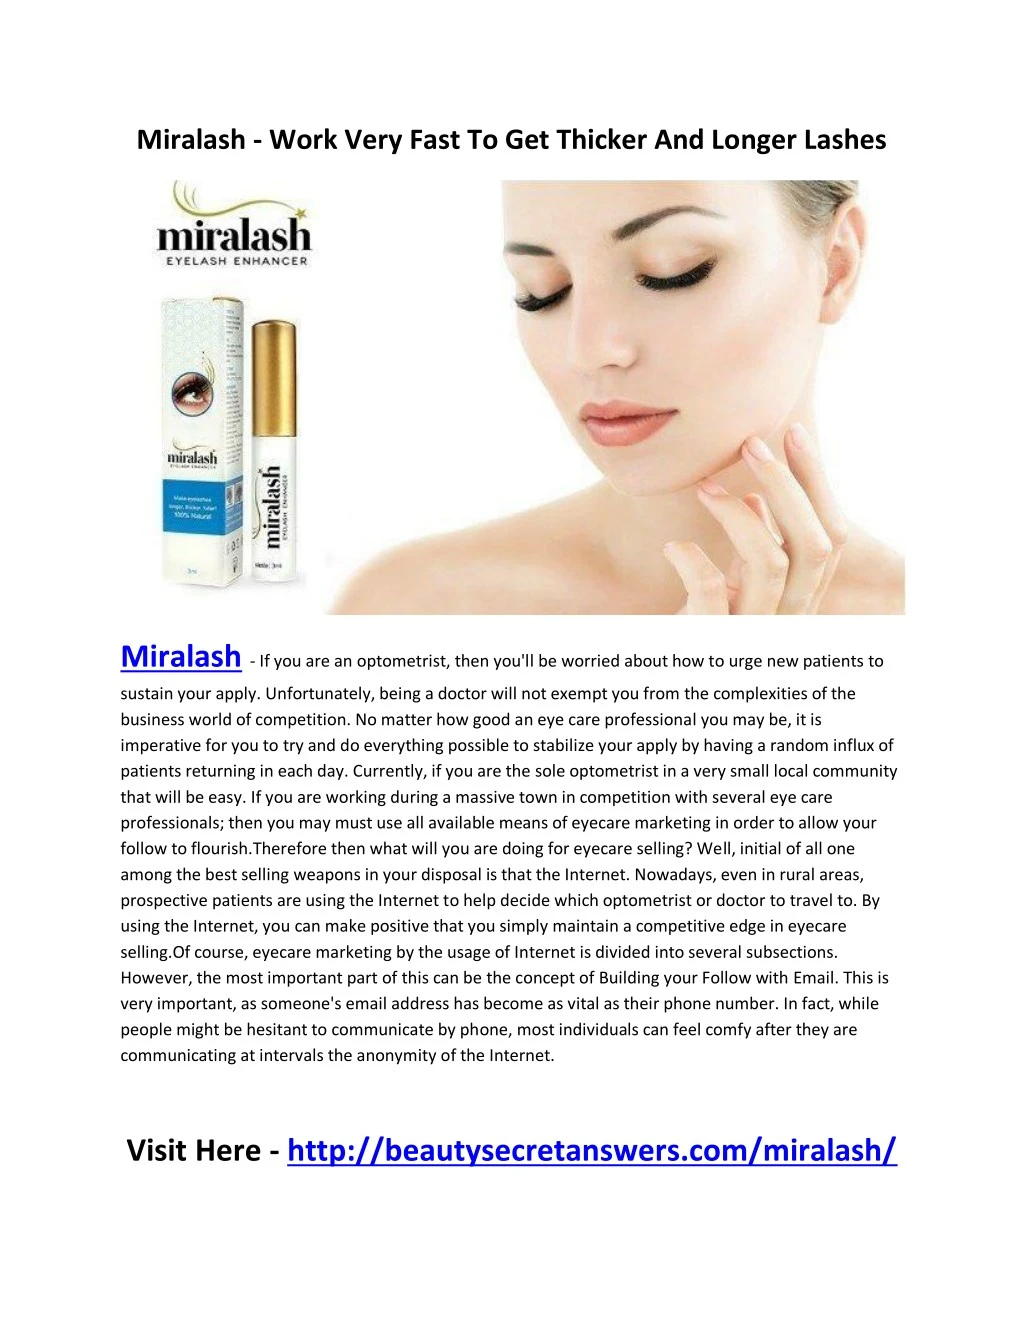 miralash work very fast to get thicker and longer